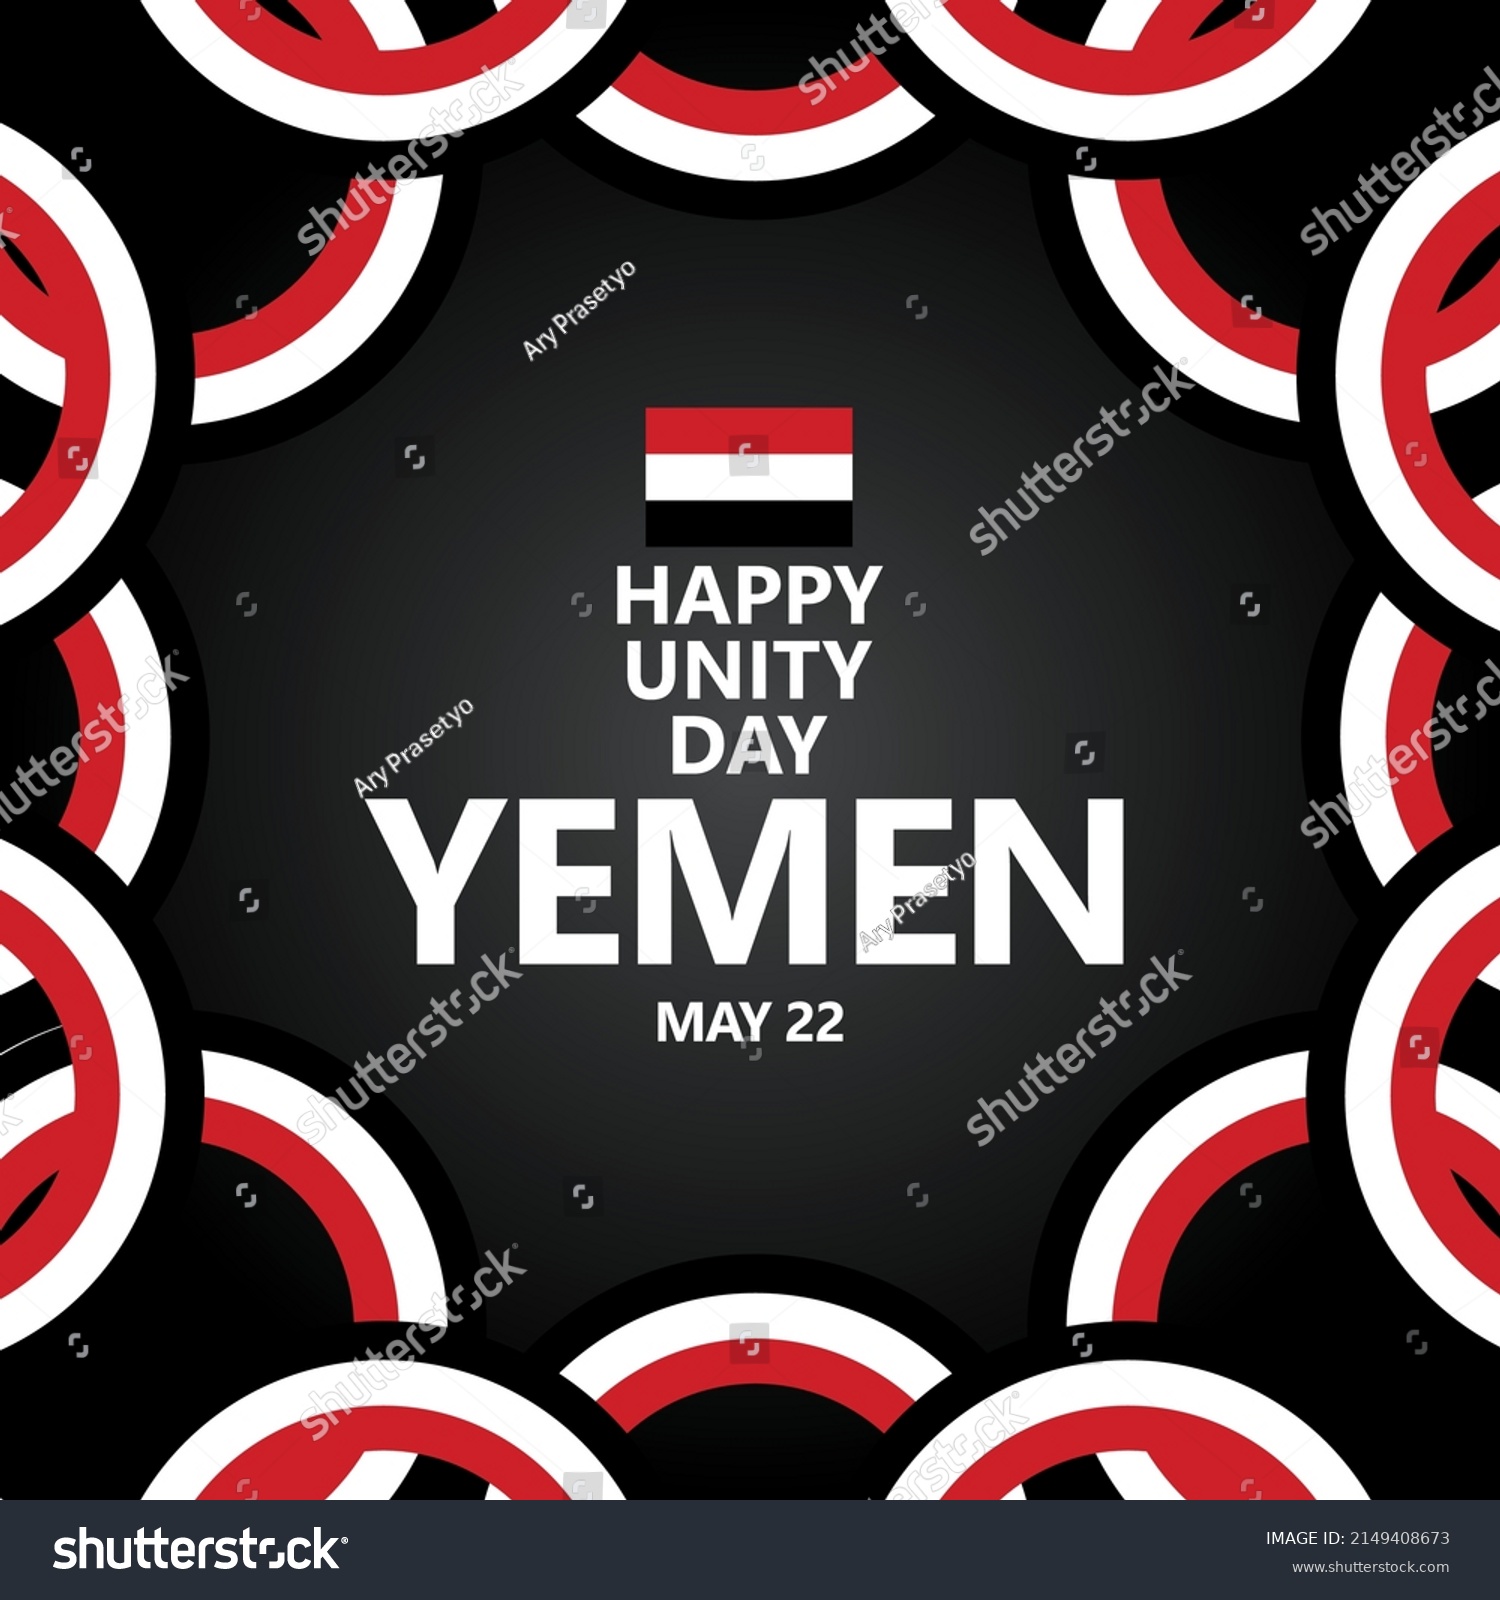 SVG of Yemen unity day celebration vector template with ribbon flags. Middle East country public holiday celebrated annually on May 22. svg